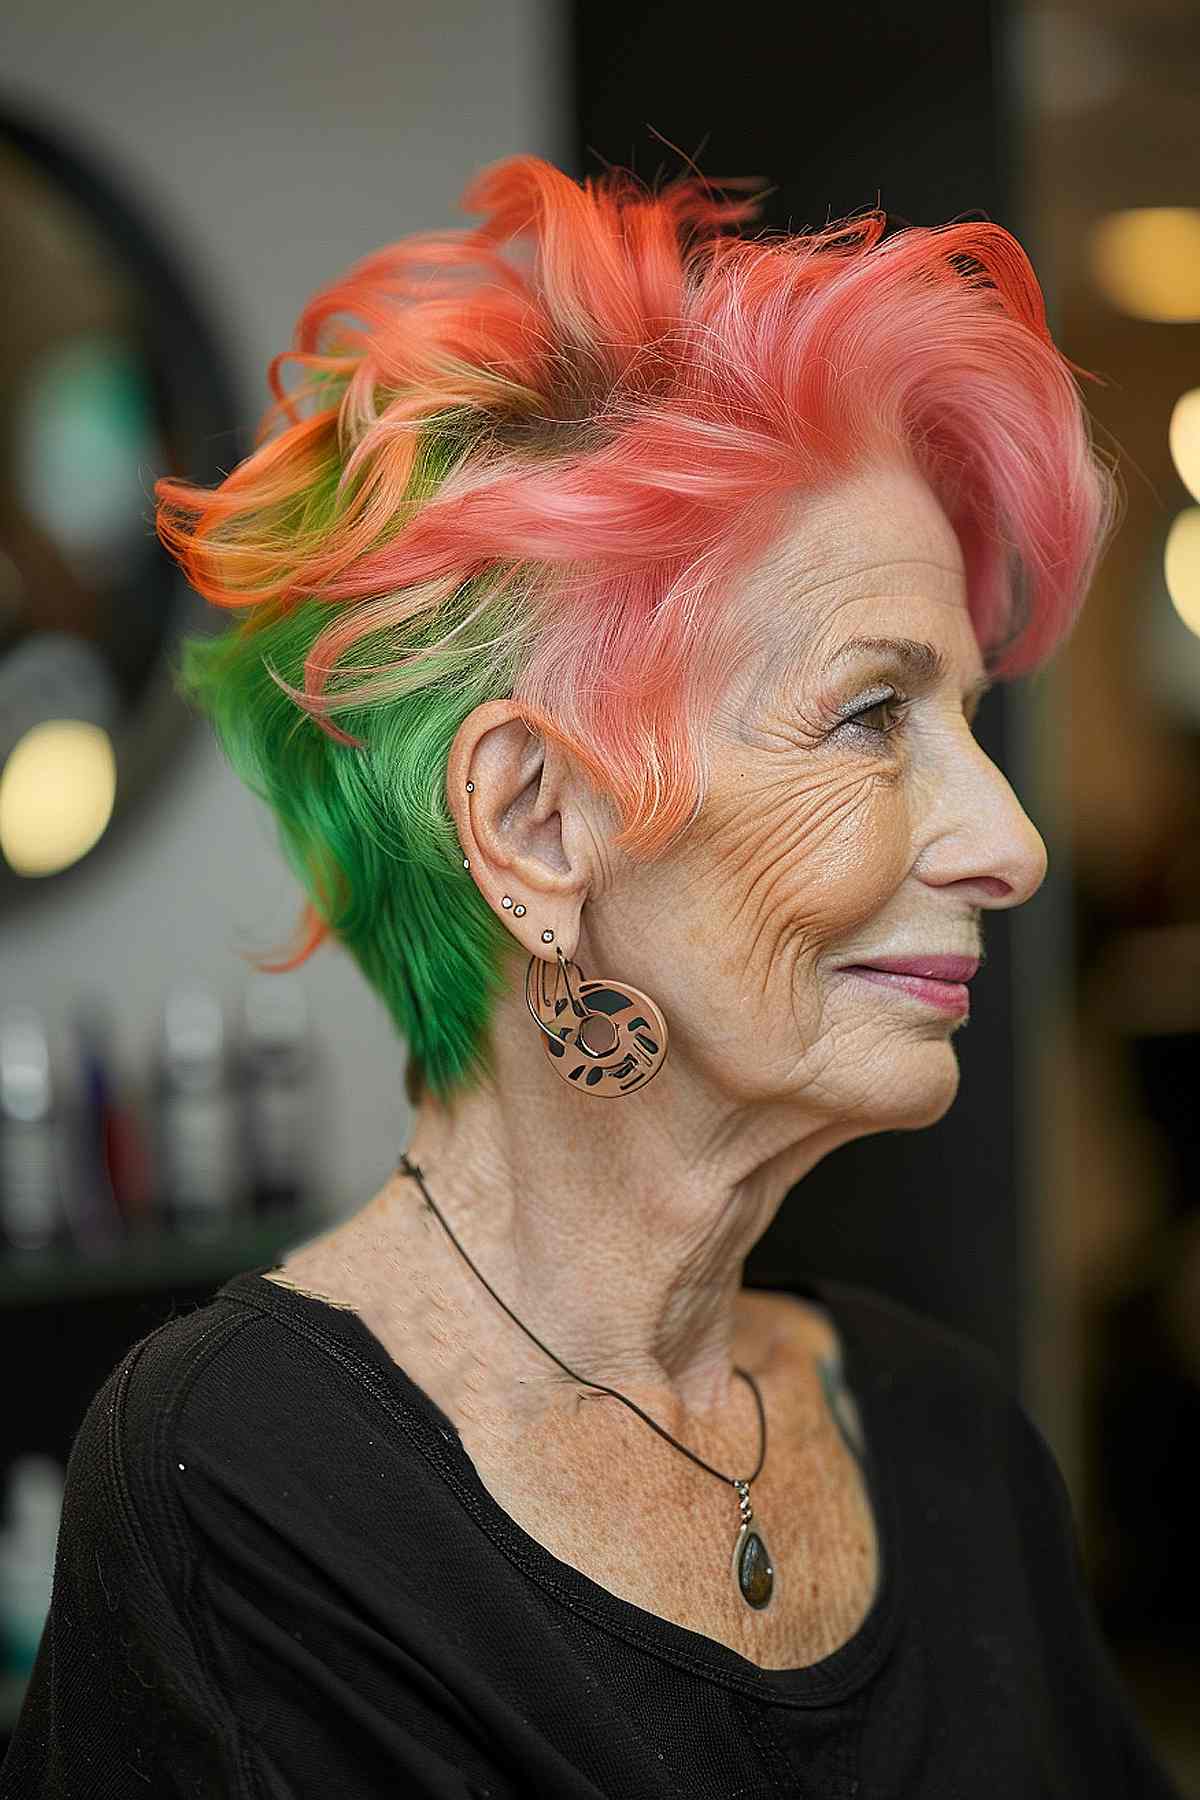 An older woman sports a vibrant short pixie cut with bright pink and green colors, demonstrating a bold and youthful hair choice for women over 70.